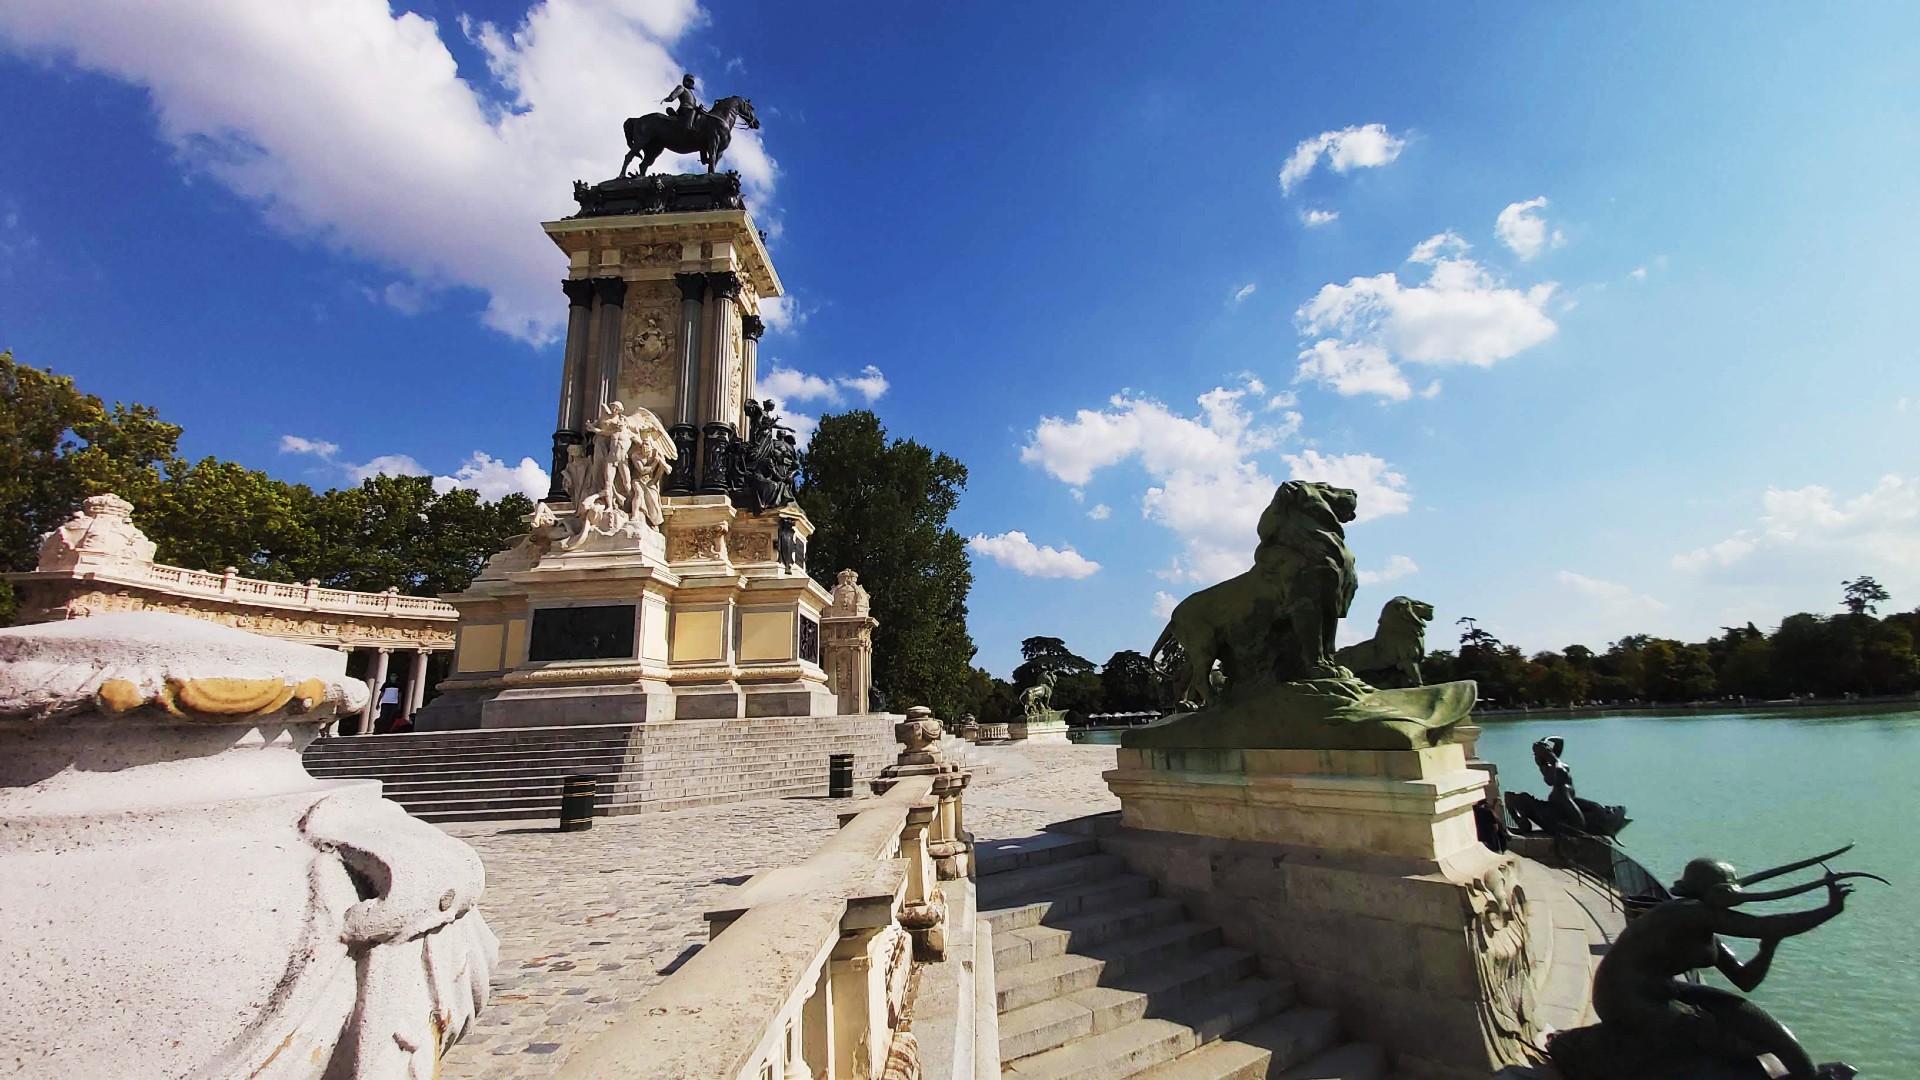 Home to Retiro Park, El Prado Museum, Madrid City Hall and Puerta de Alcalá, Distrito de Retiro is one of the best areas to stay in Madrid for sightseeing